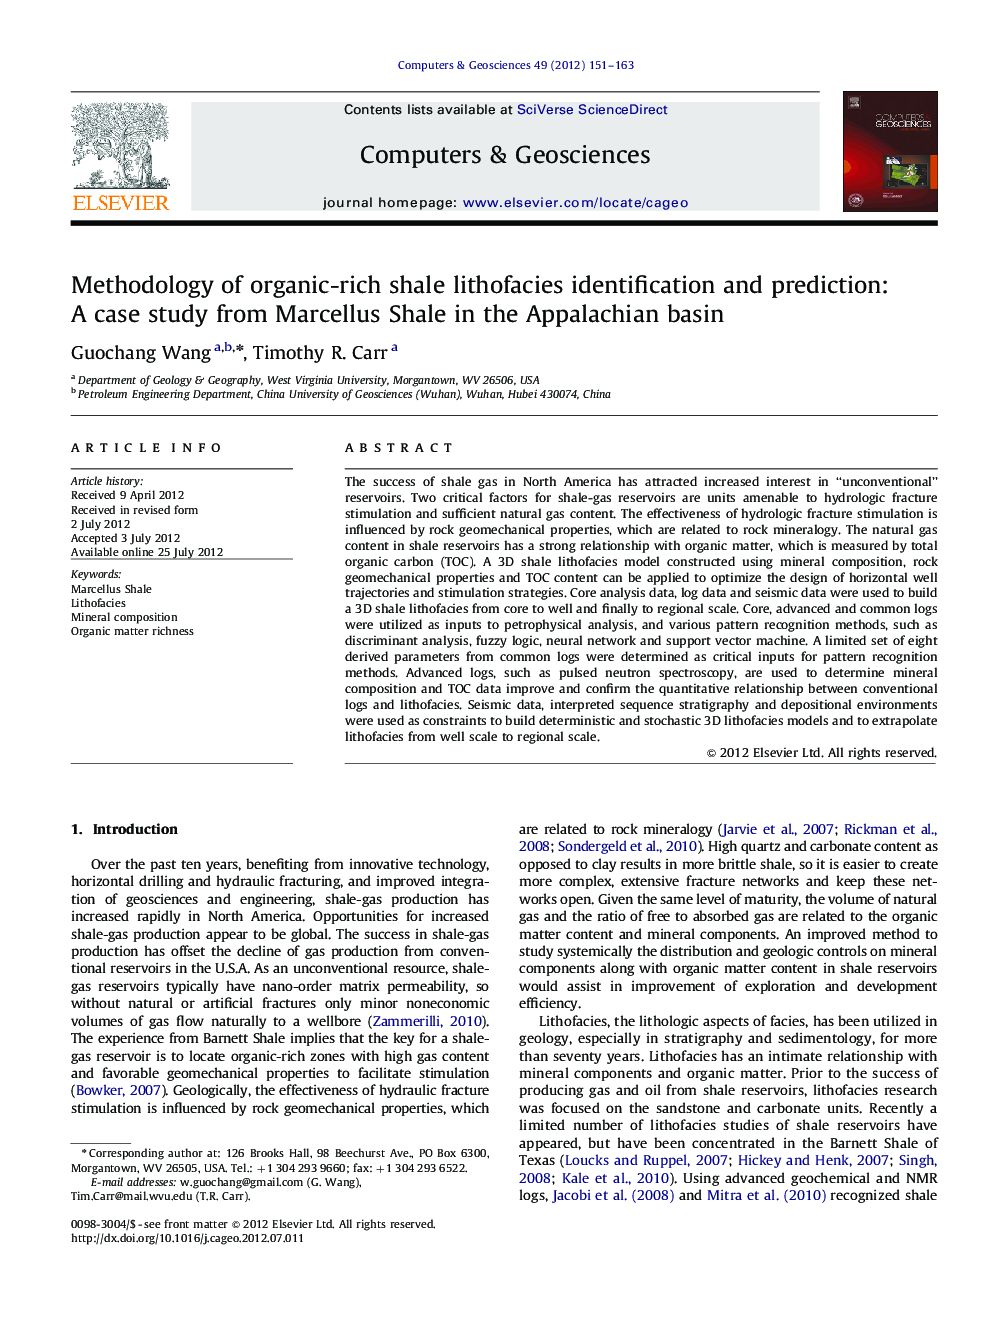 Methodology of organic-rich shale lithofacies identification and prediction: A case study from Marcellus Shale in the Appalachian basin